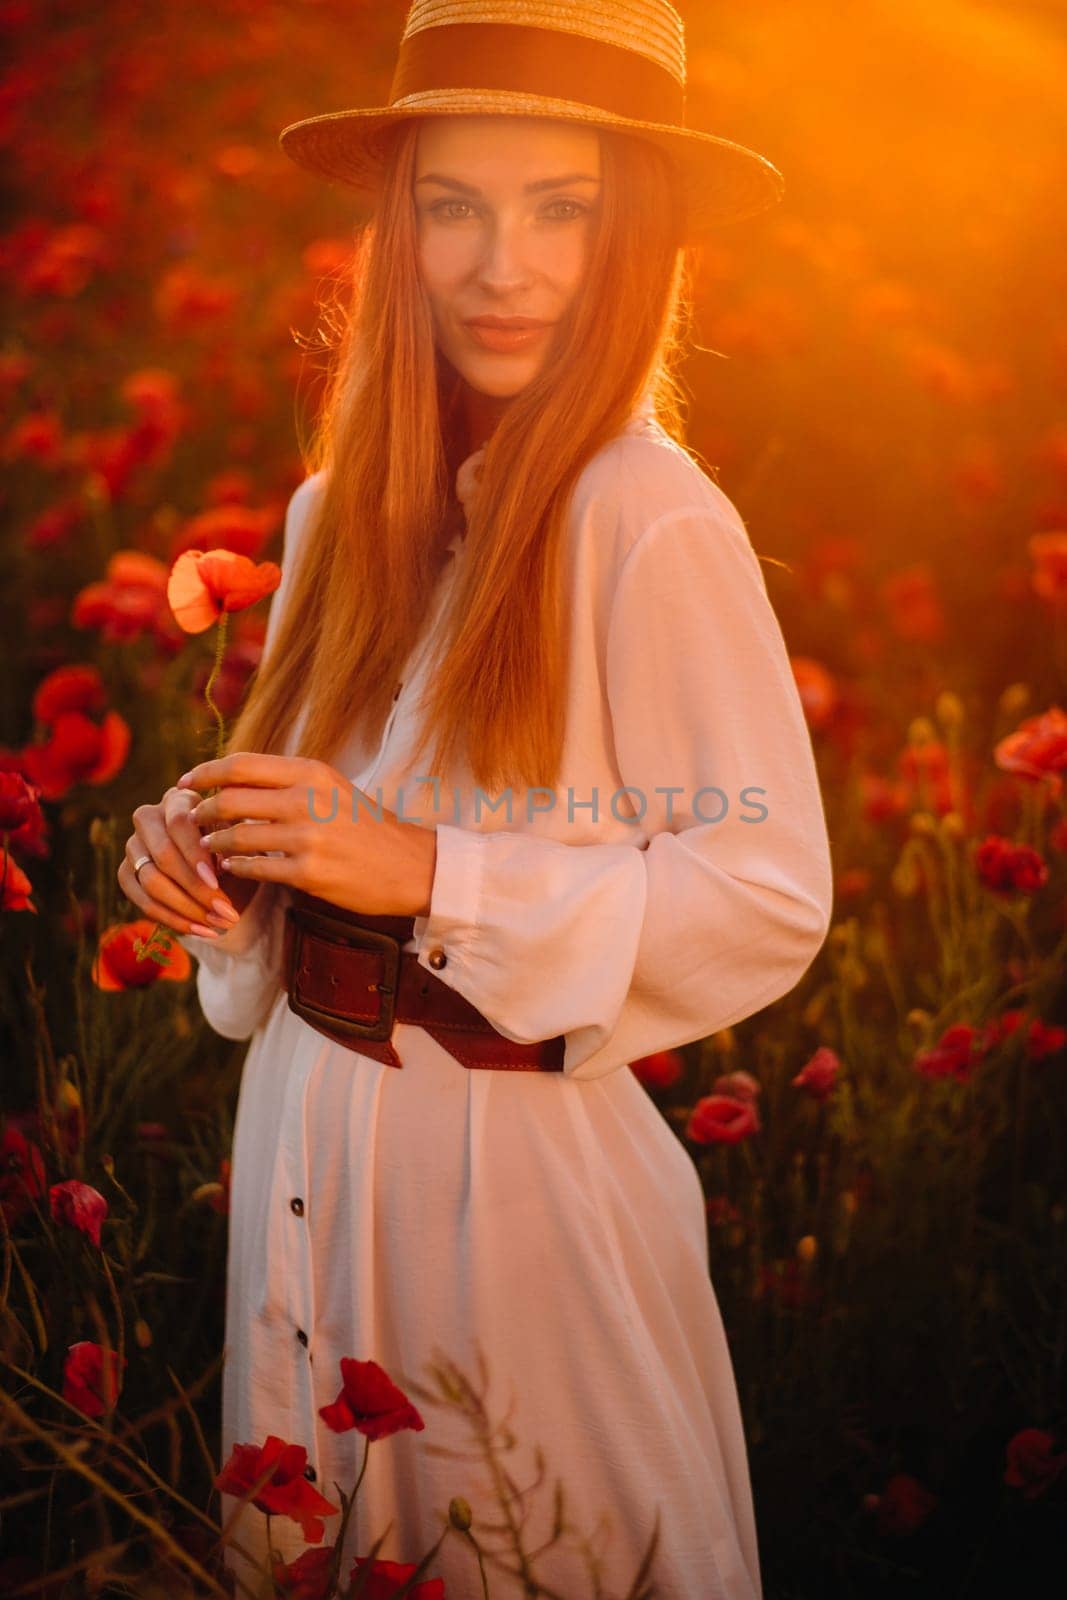 a girl in a white dress and hat stands in a field with poppies at sunset and holds a poppy flower in her hand.